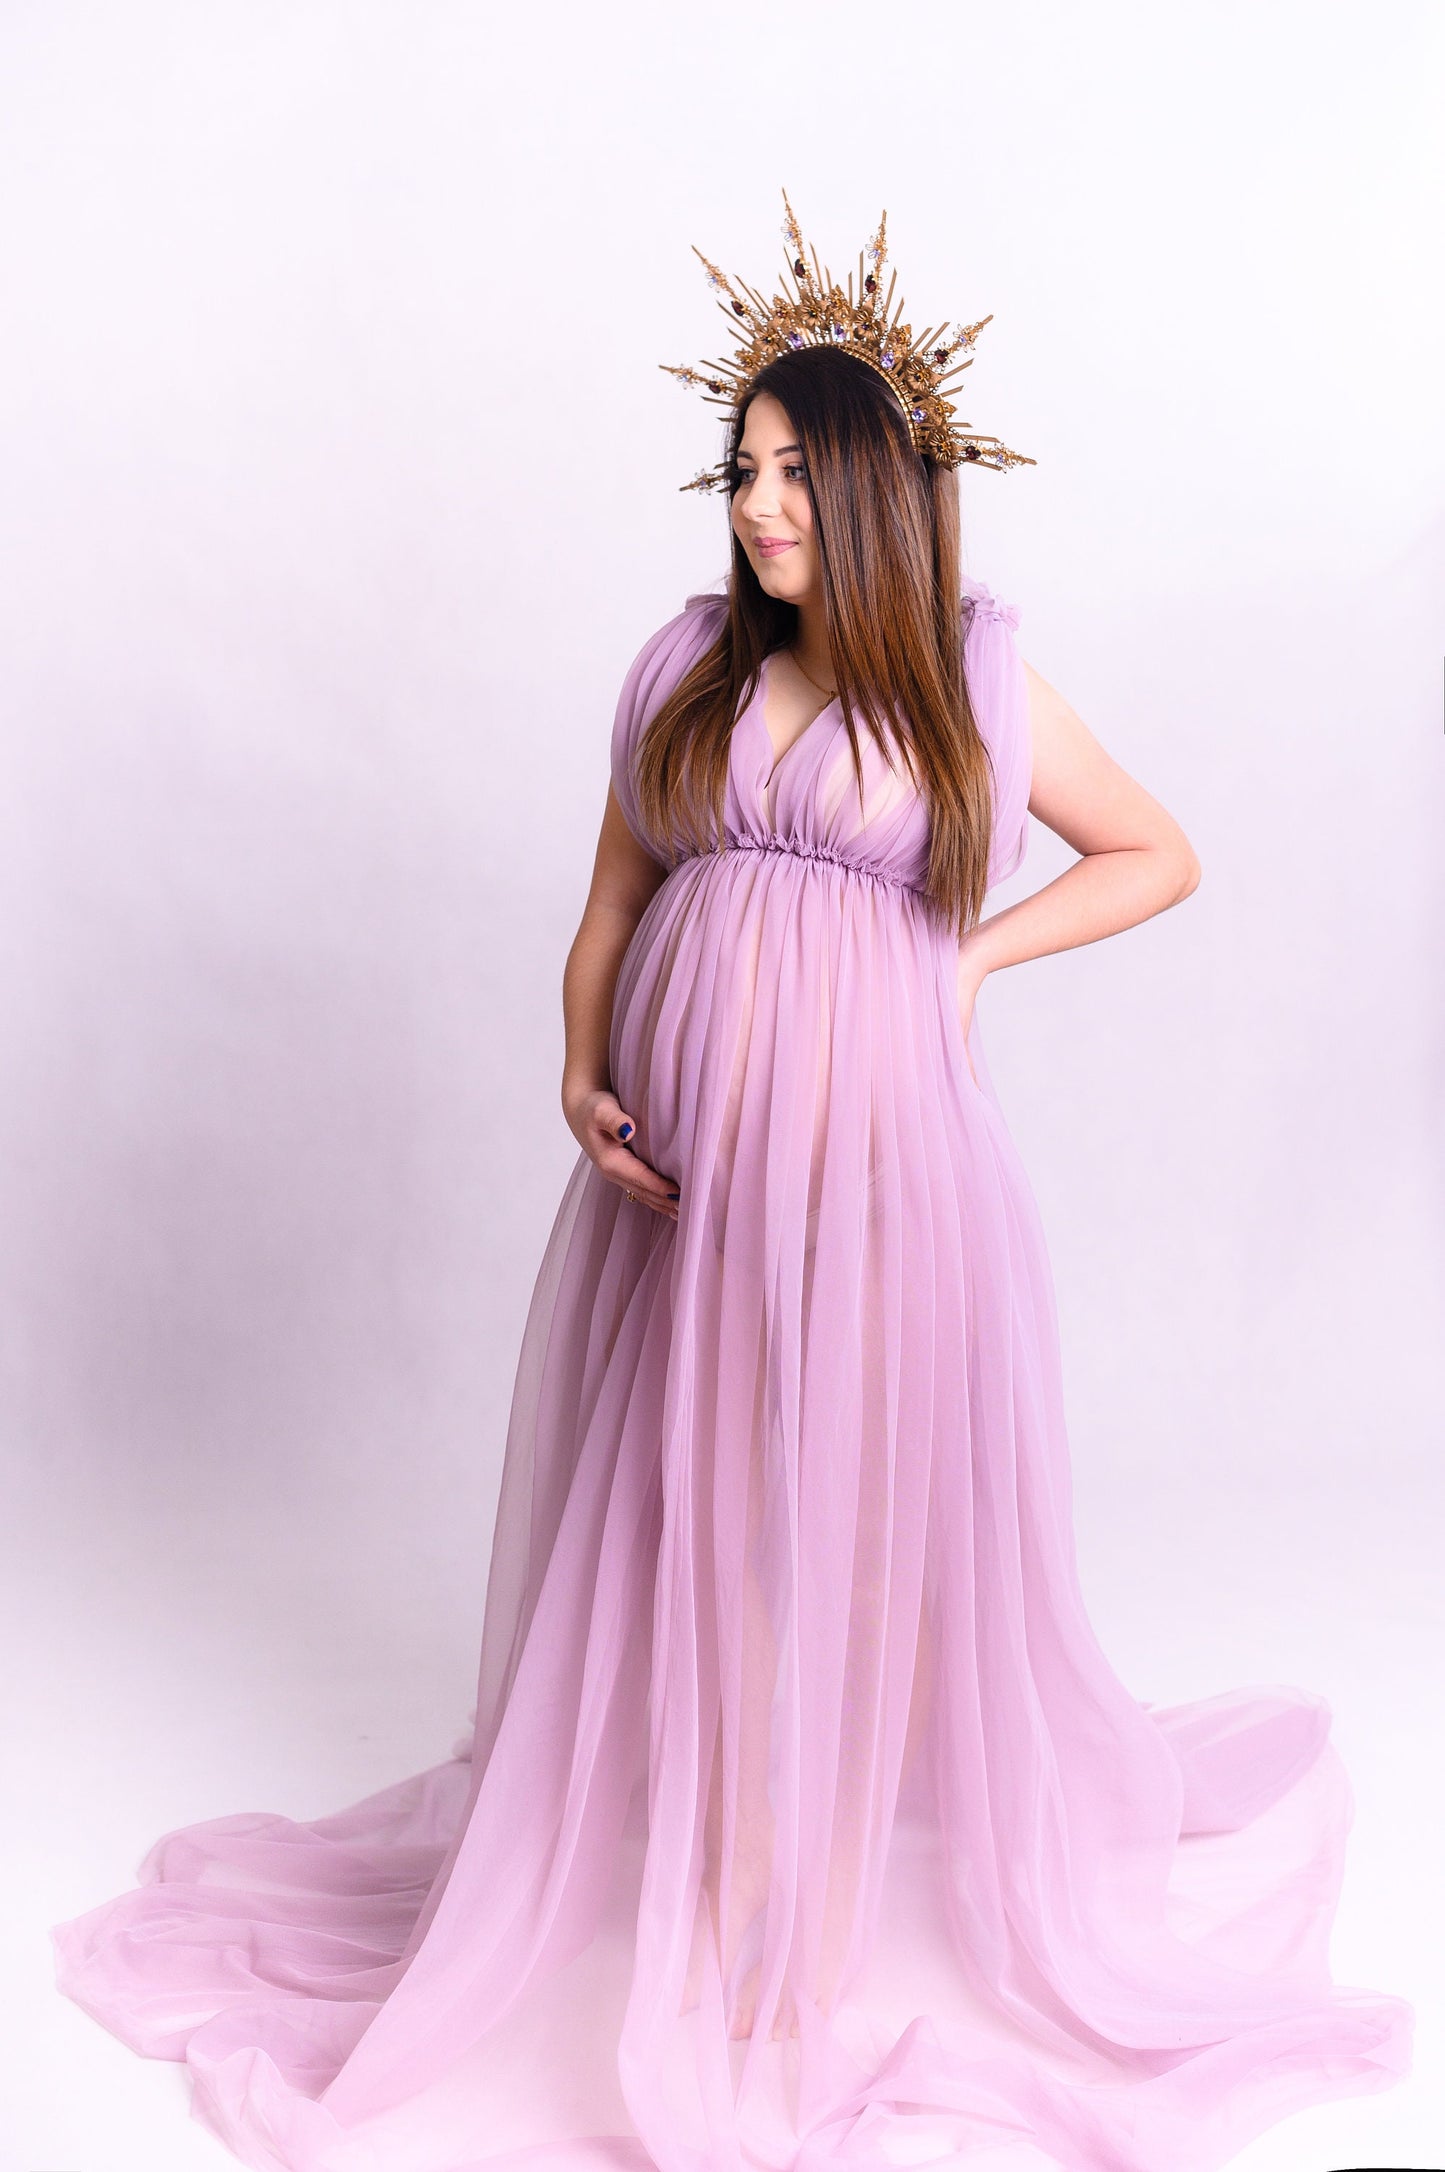 Maternity halo crown for pregnancy photo shoot